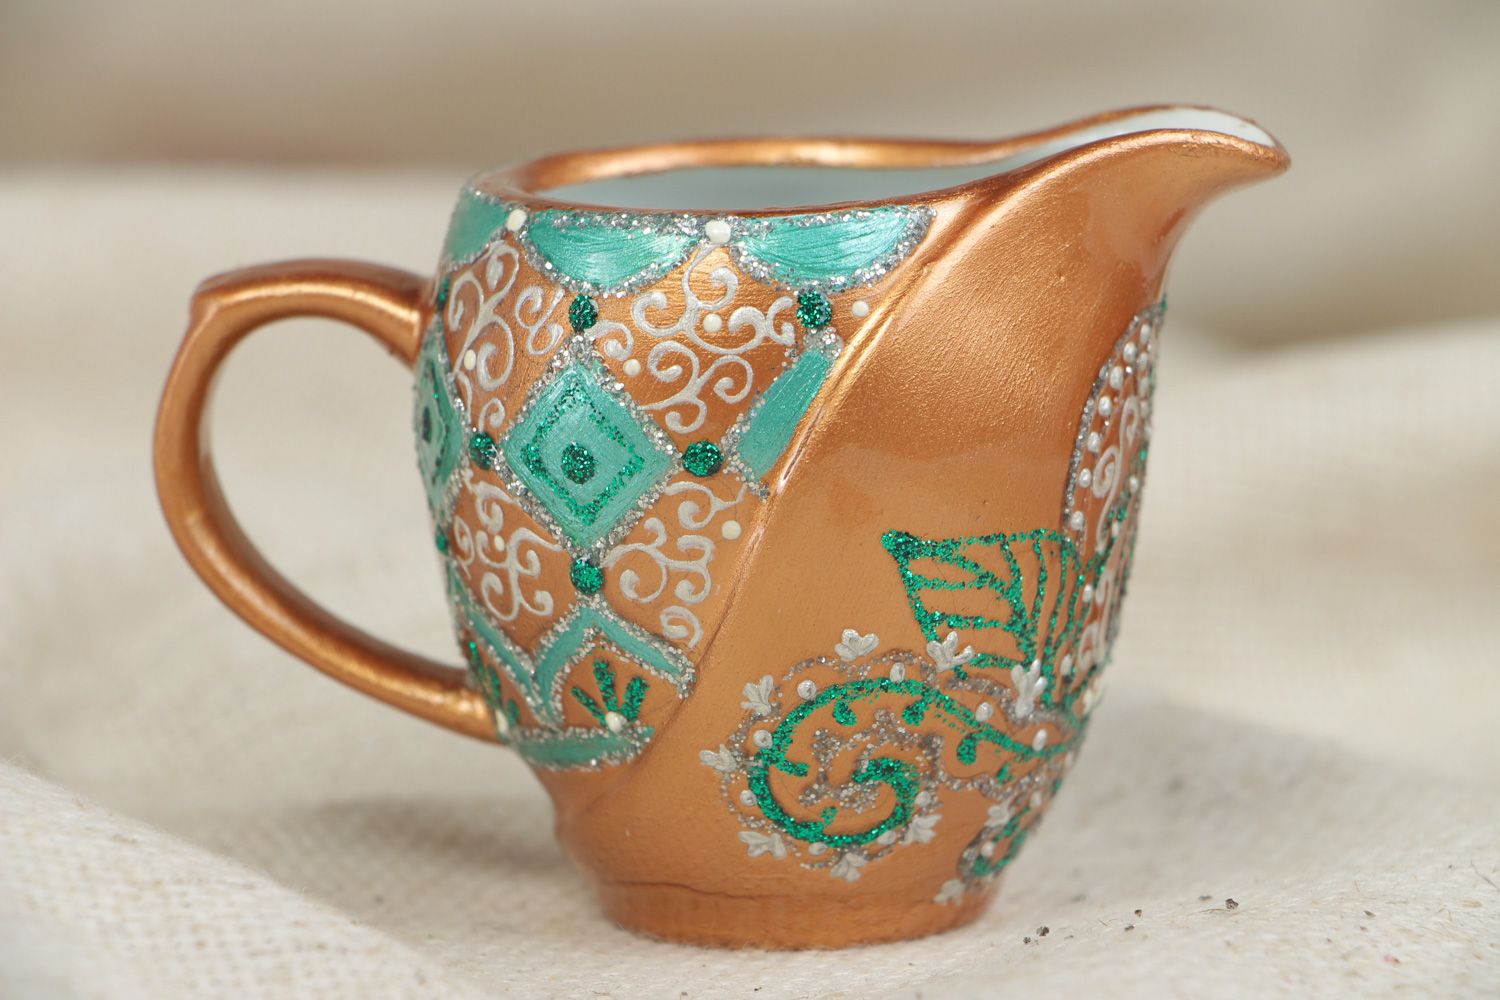 5 oz hand-painted creamer pitcher in gold and green colors 0,25 lb photo 5